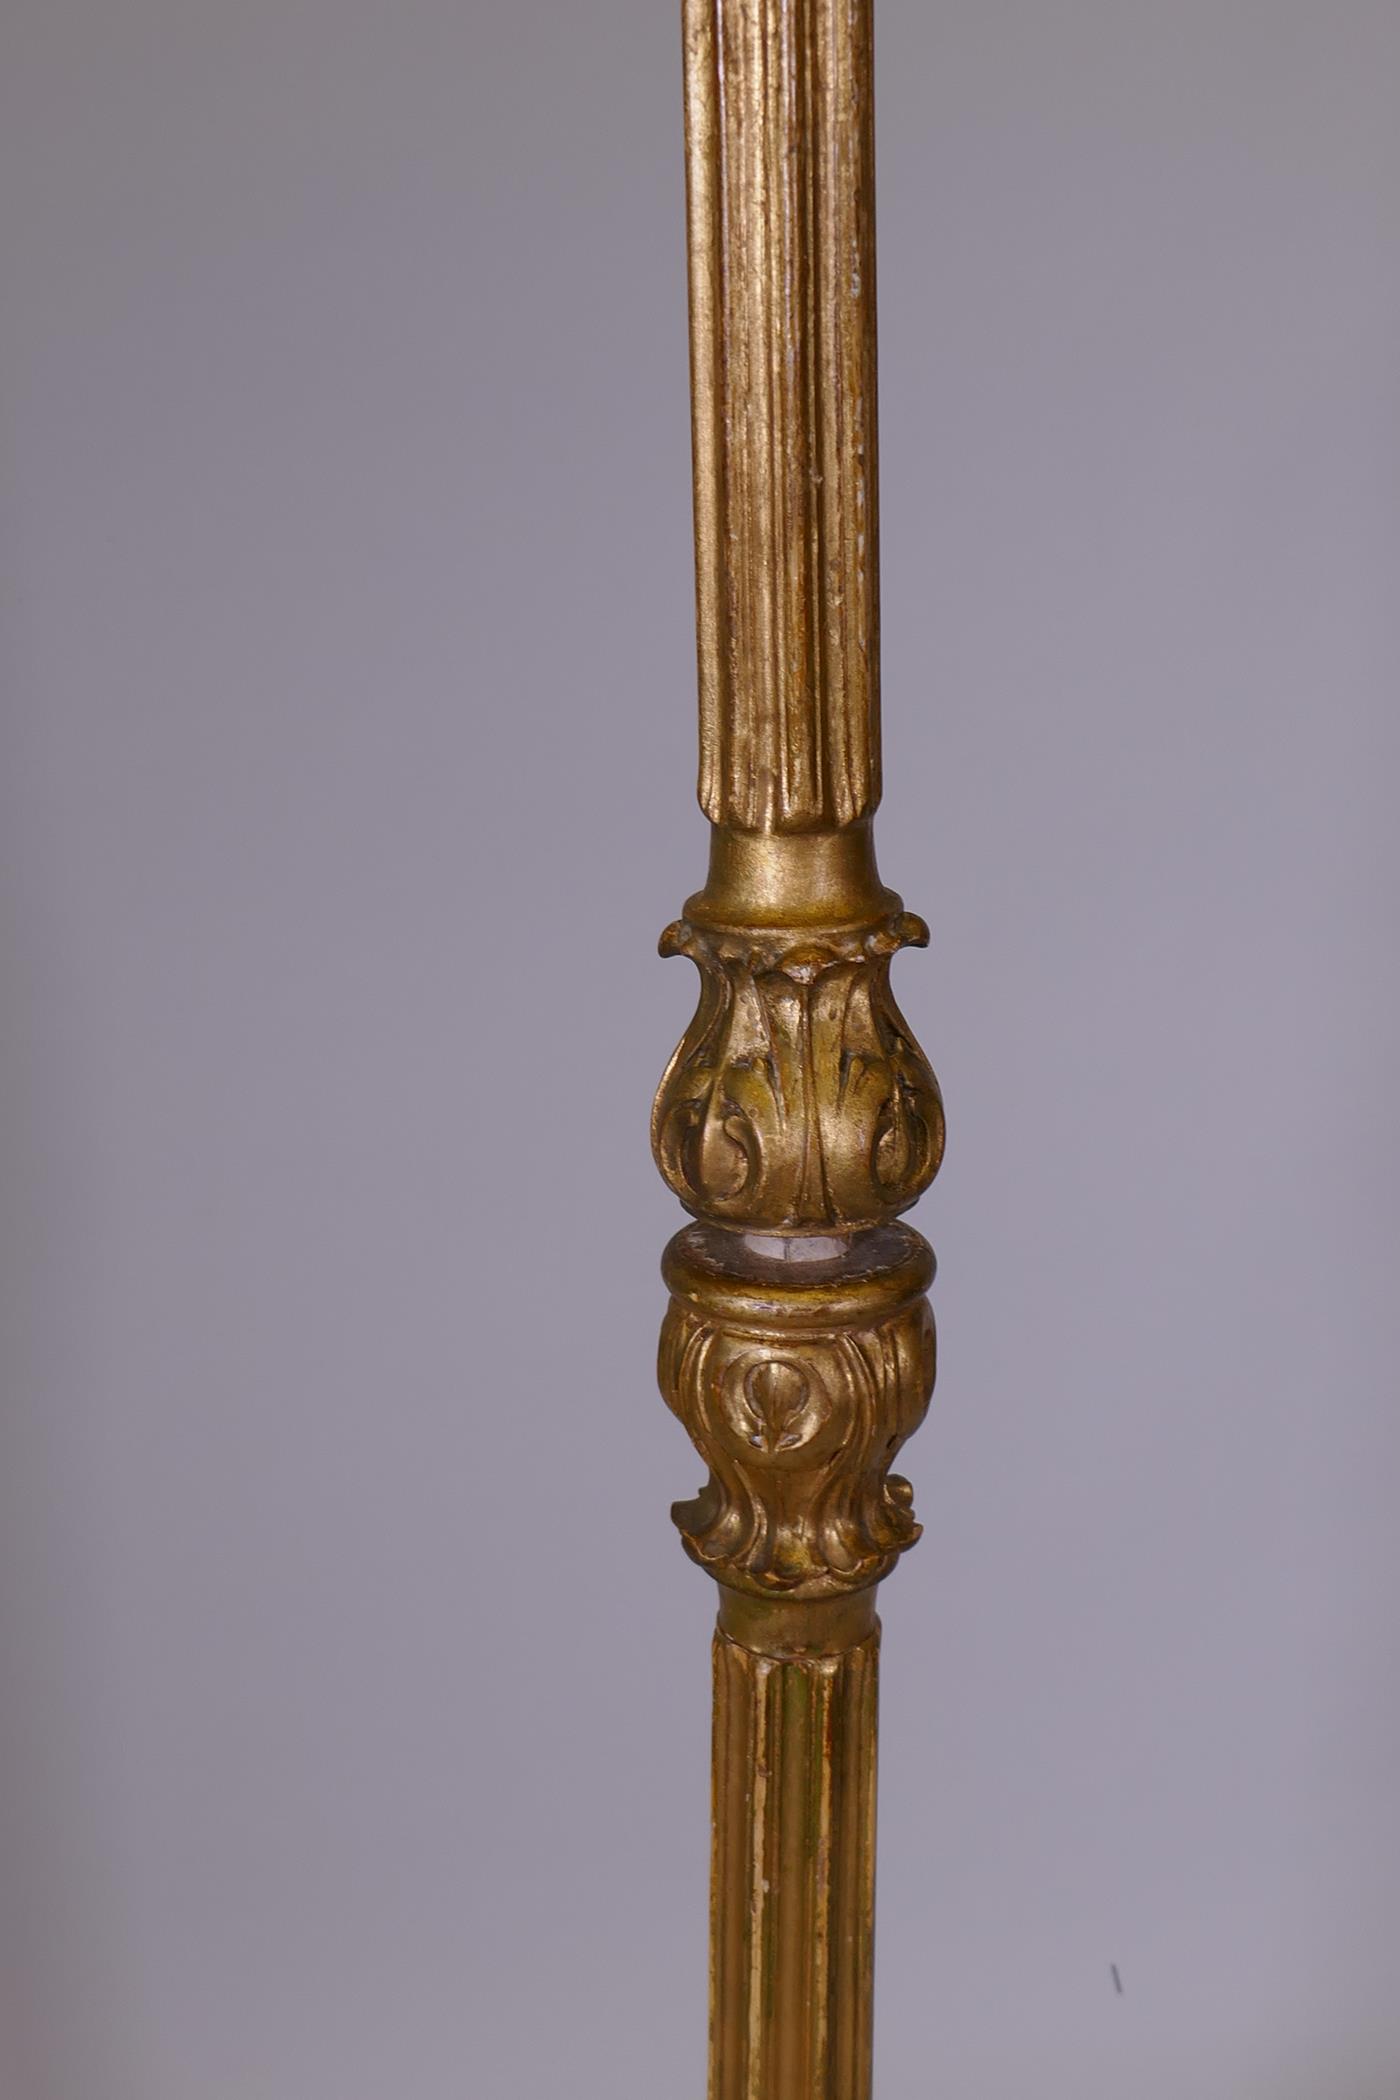 Italian giltwood floor lamp in the form of a lantern, mid C20th, 77" high - Image 3 of 5